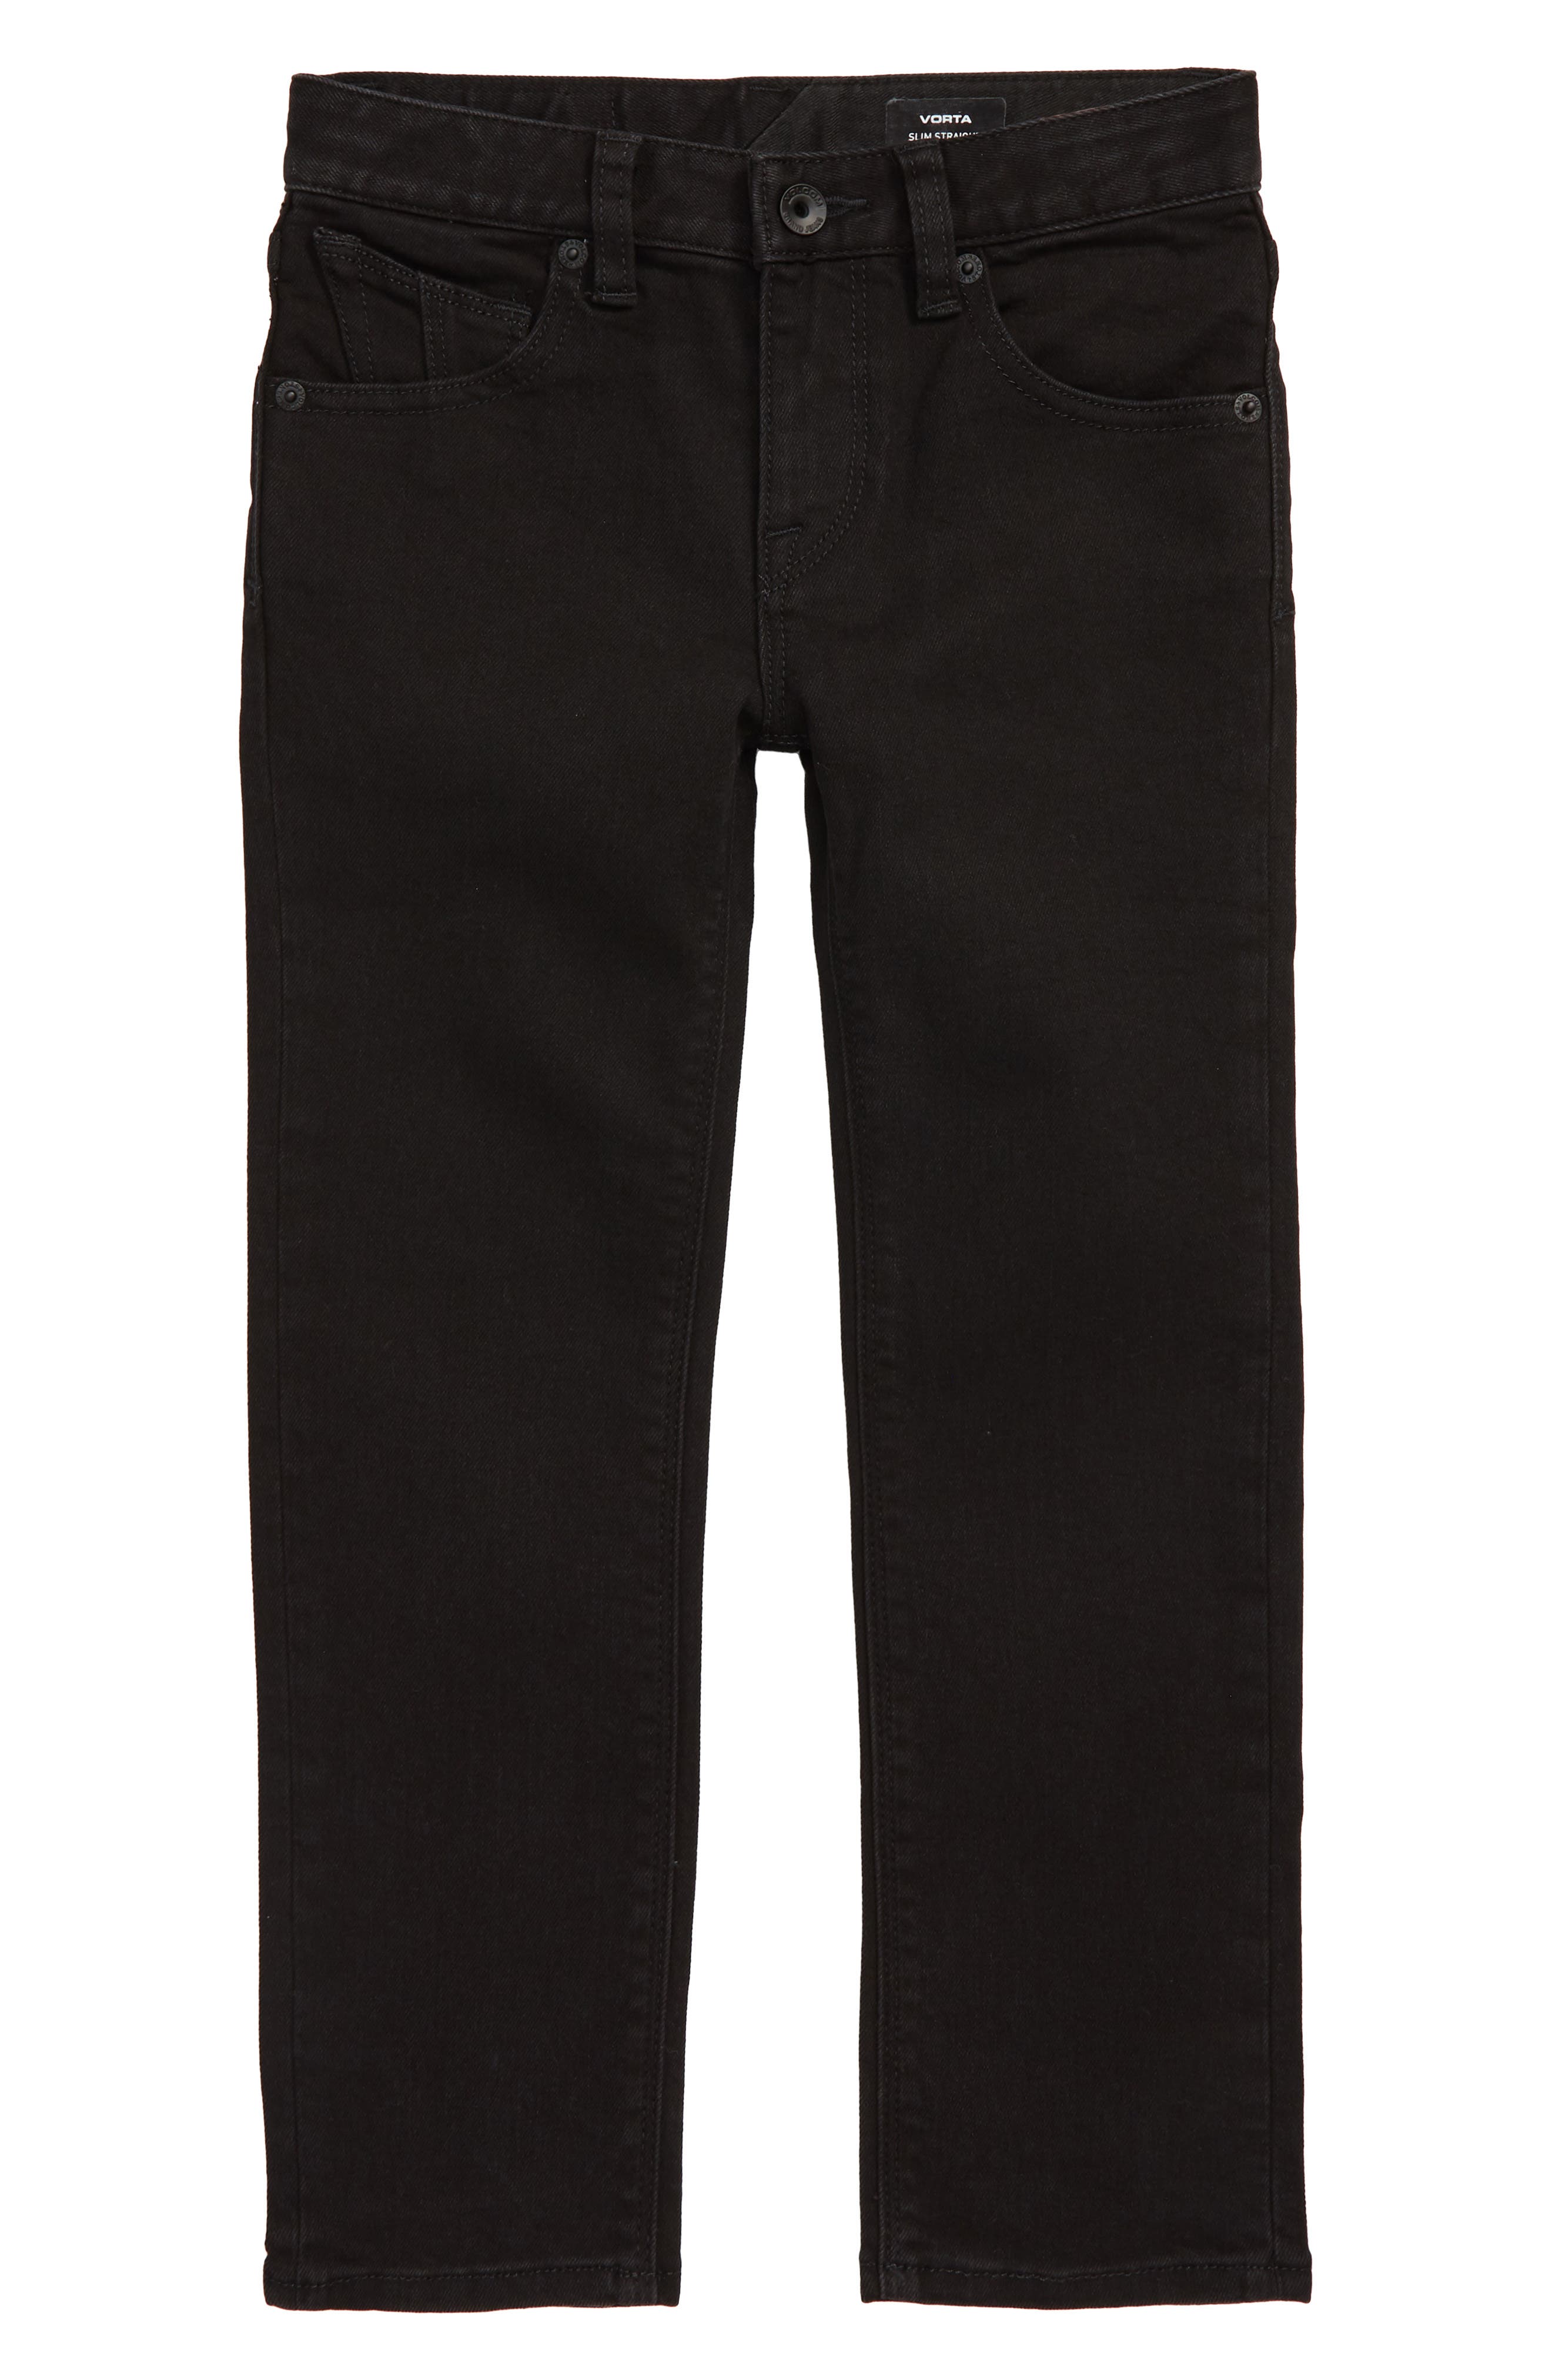 black jeans in store